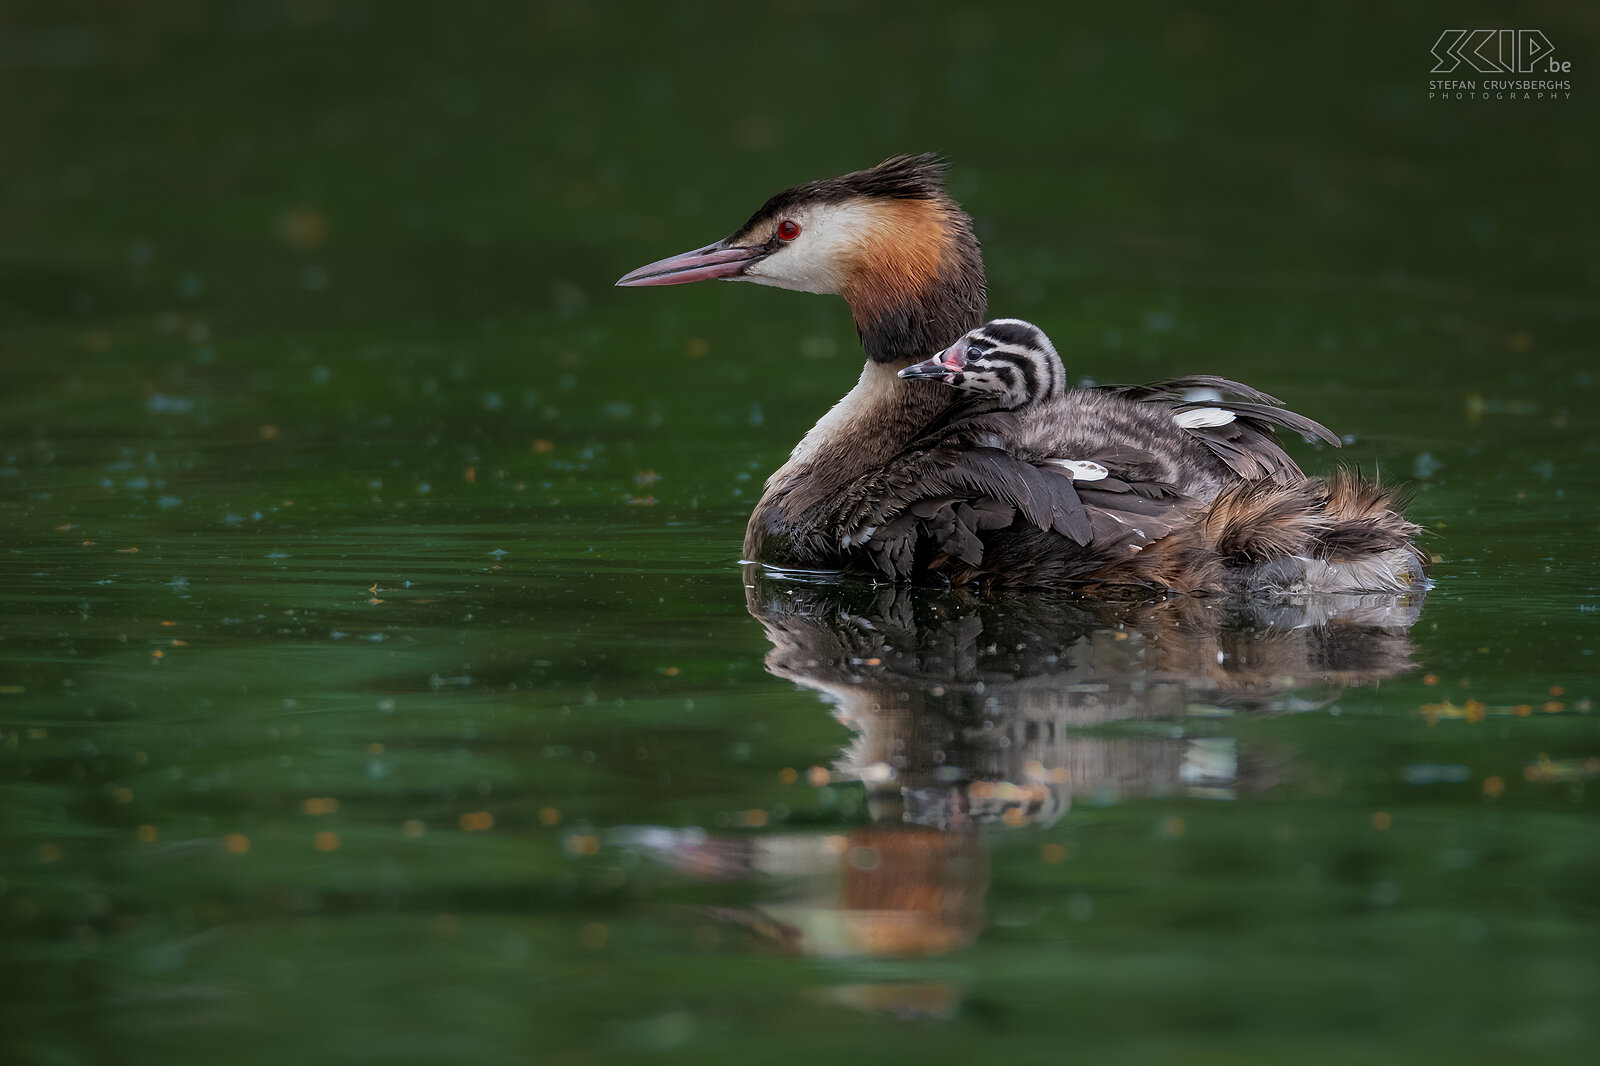 Water birds - Great crested grebe with chick A small series of images from recent years of beautiful water birds in the Low Countries such as grebes, coots, avocets, ducks, terns, ... These images were made from hides, from a small boat or simply from the water's edge. Stefan Cruysberghs